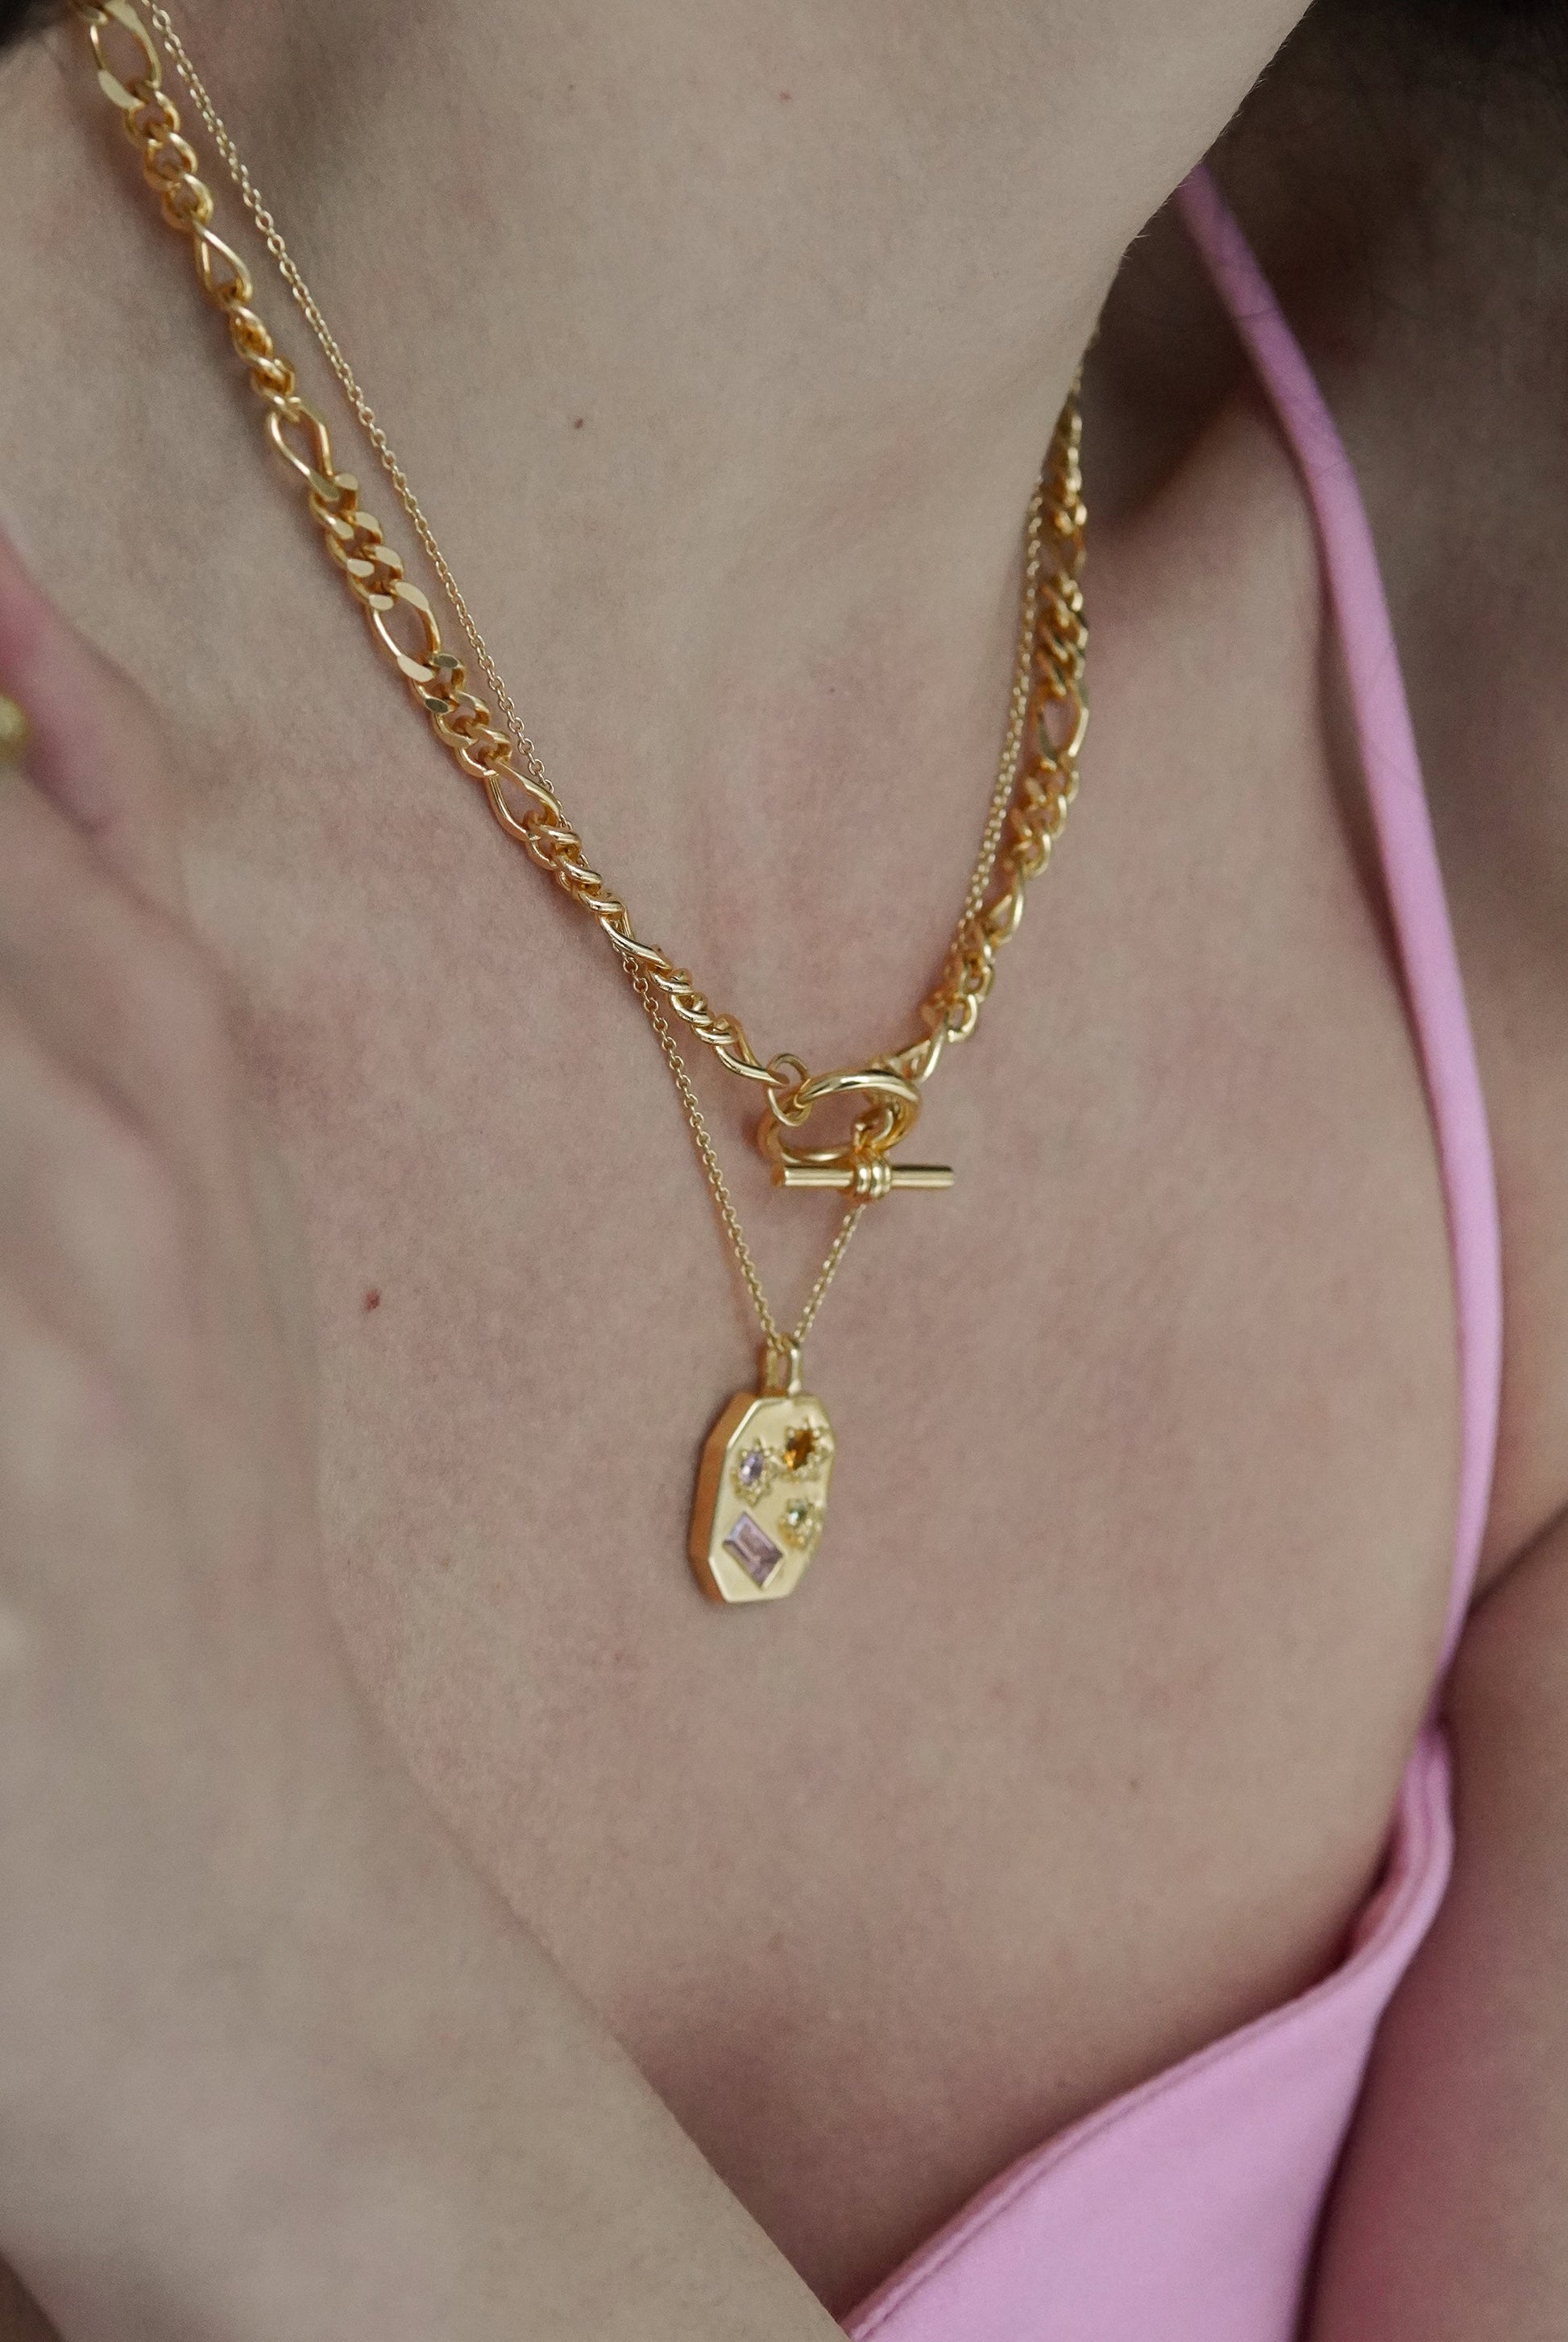 necklace shown in gold on a model